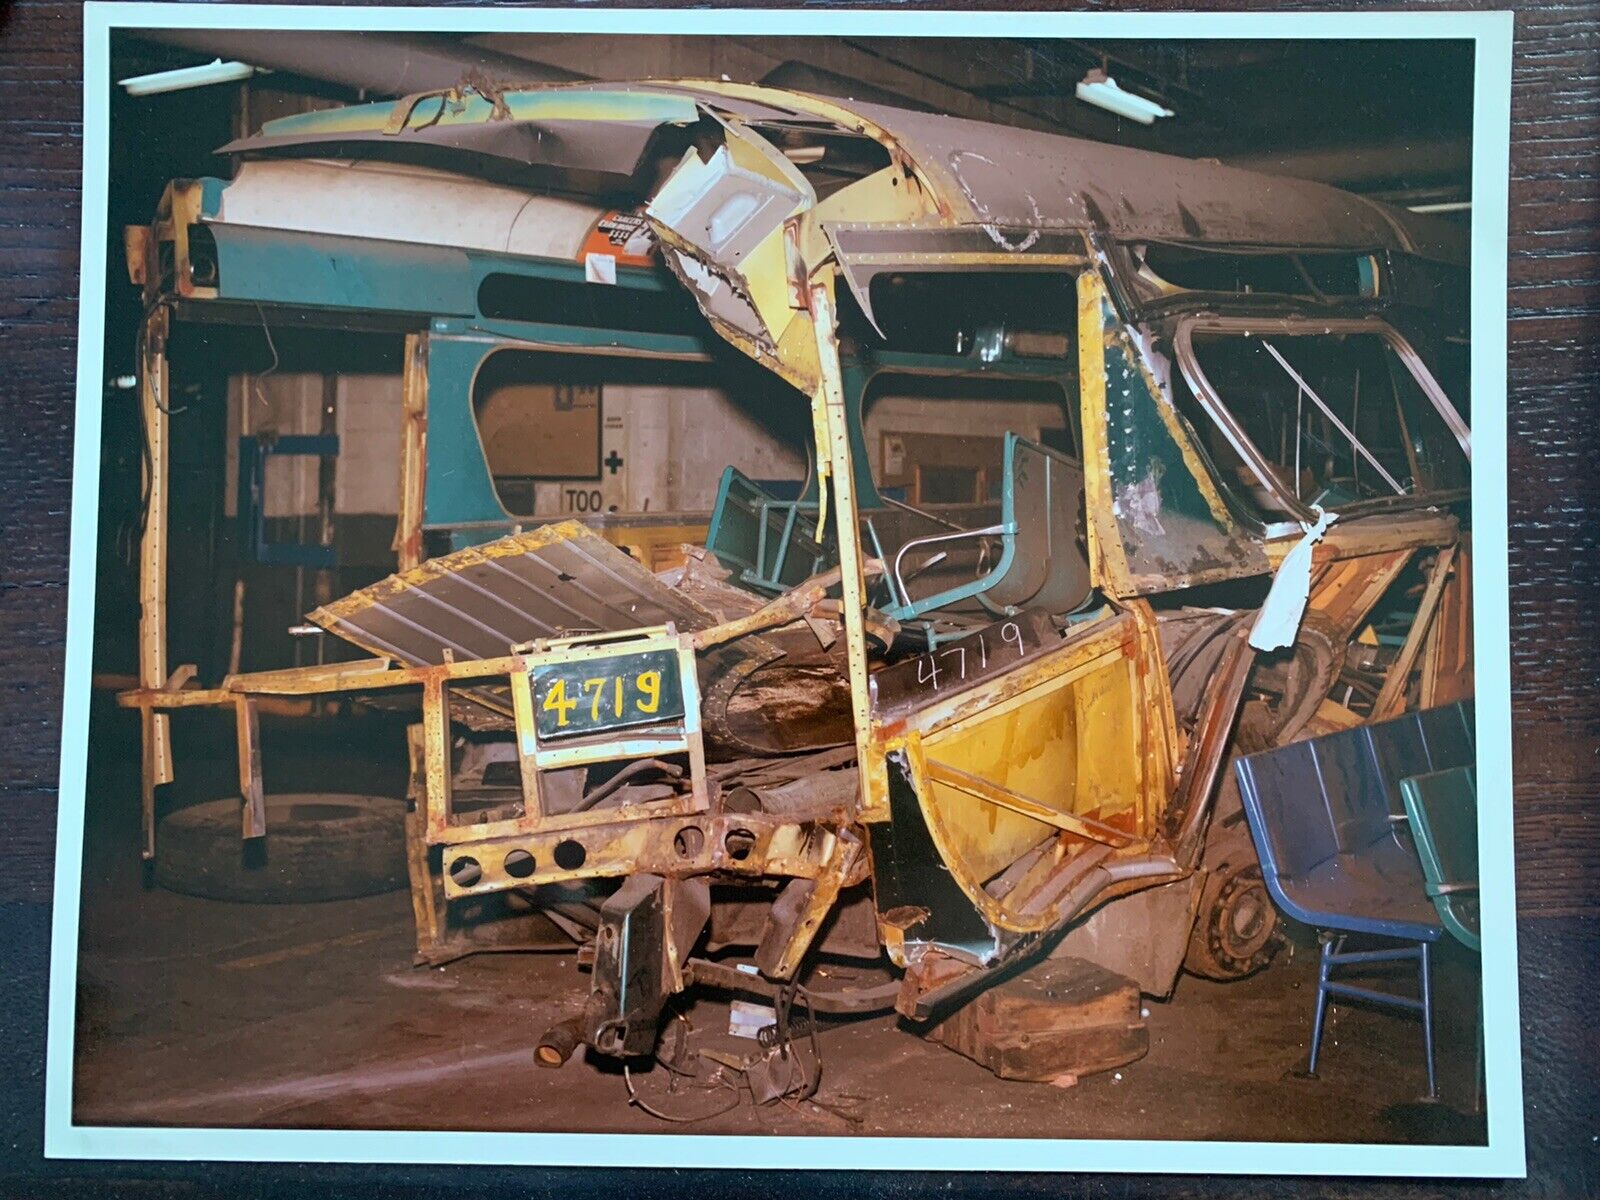 8X10 NY NYC SURFACE TRANSIT BUS #4719 SCRAPPED JUNKER NYCTA OLD COLOR PHOTOGRAPH